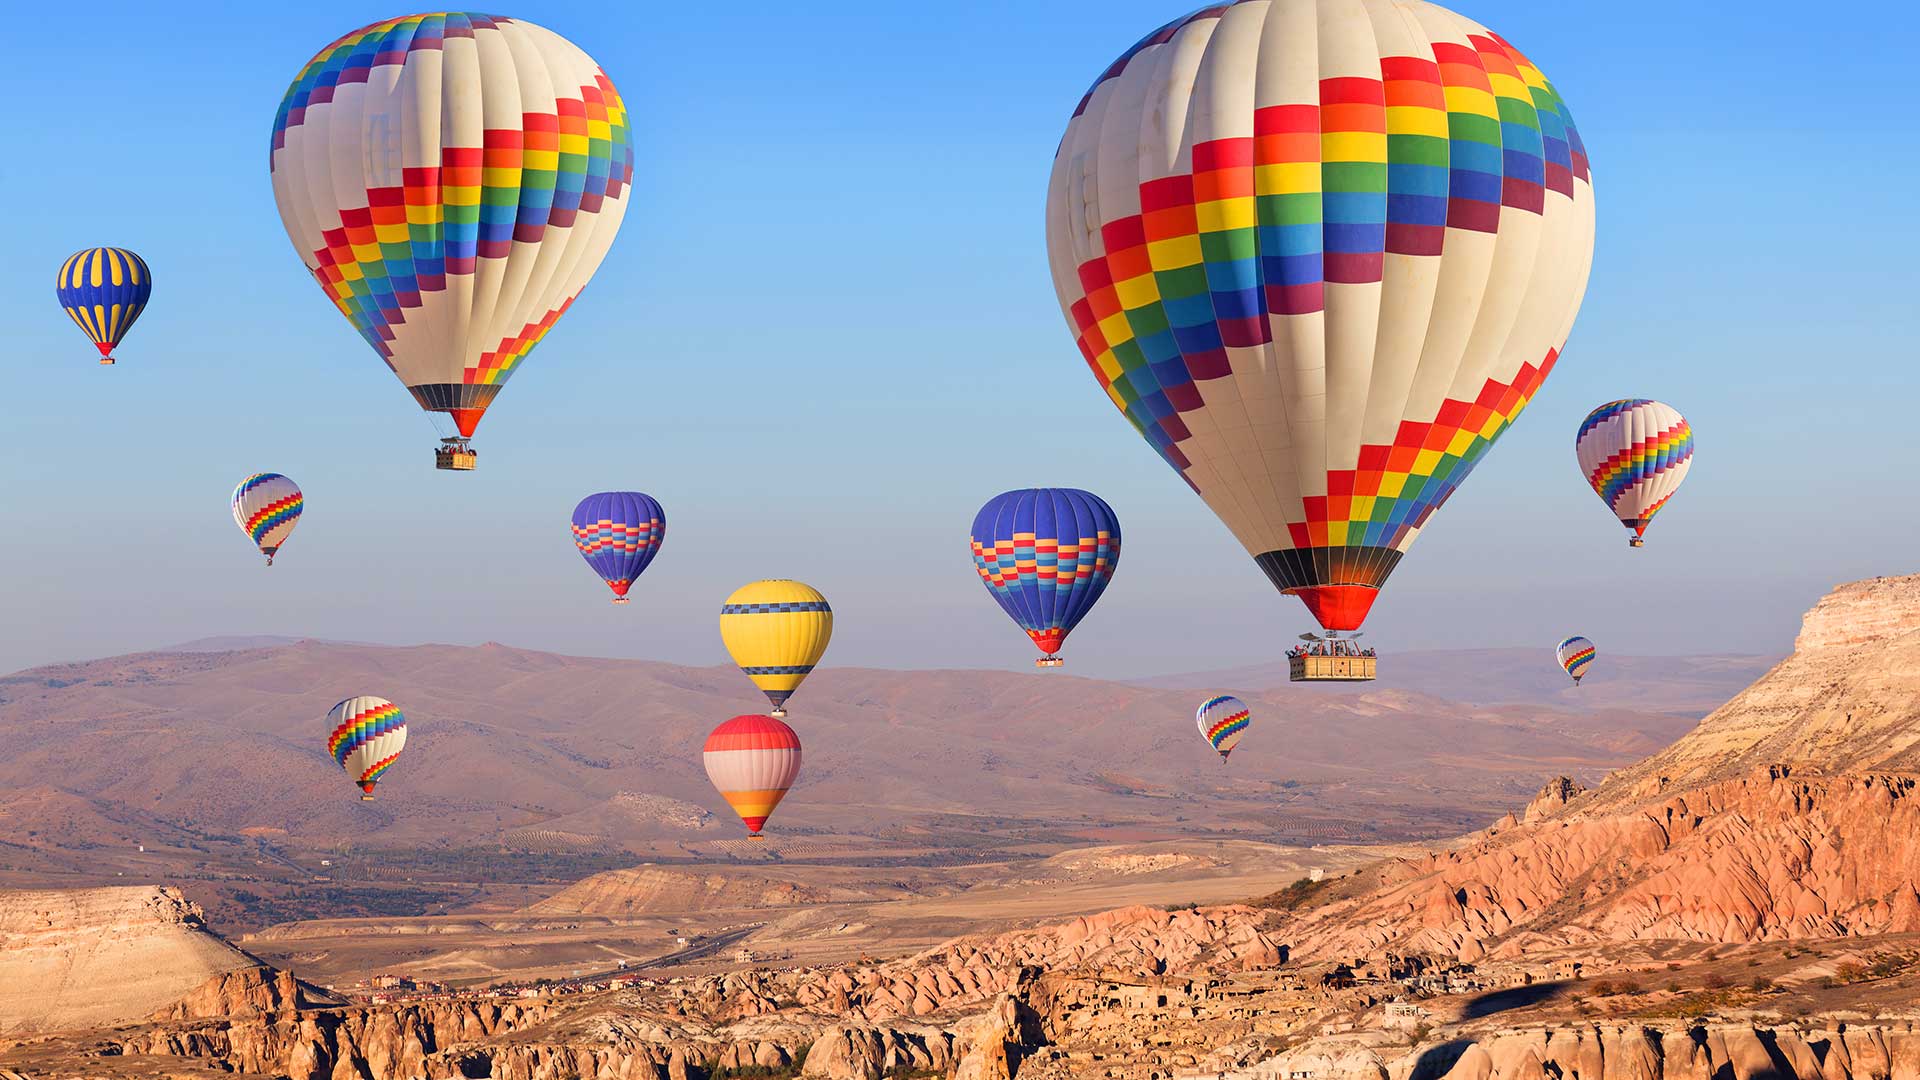 Colorful hot air balloons floating above a rugged landscape at sunrise.